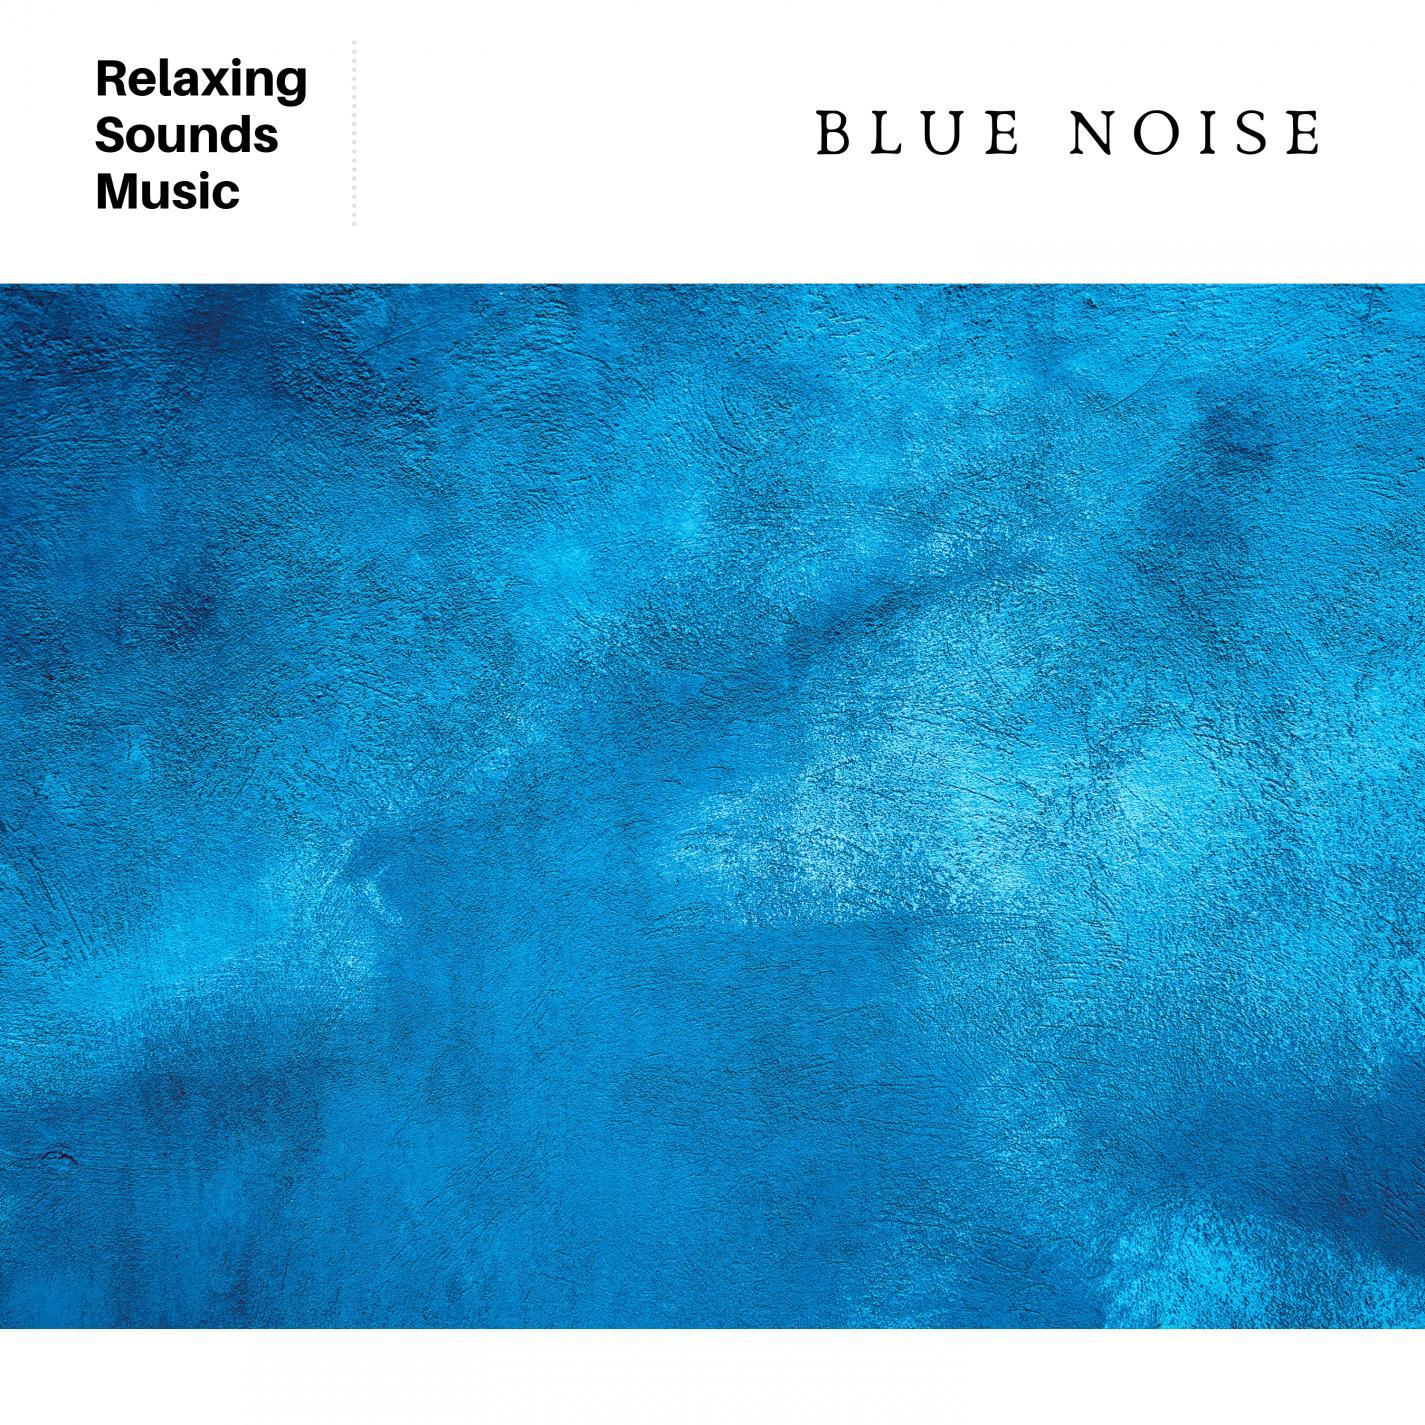 Deep Blue Noise for Relaxation